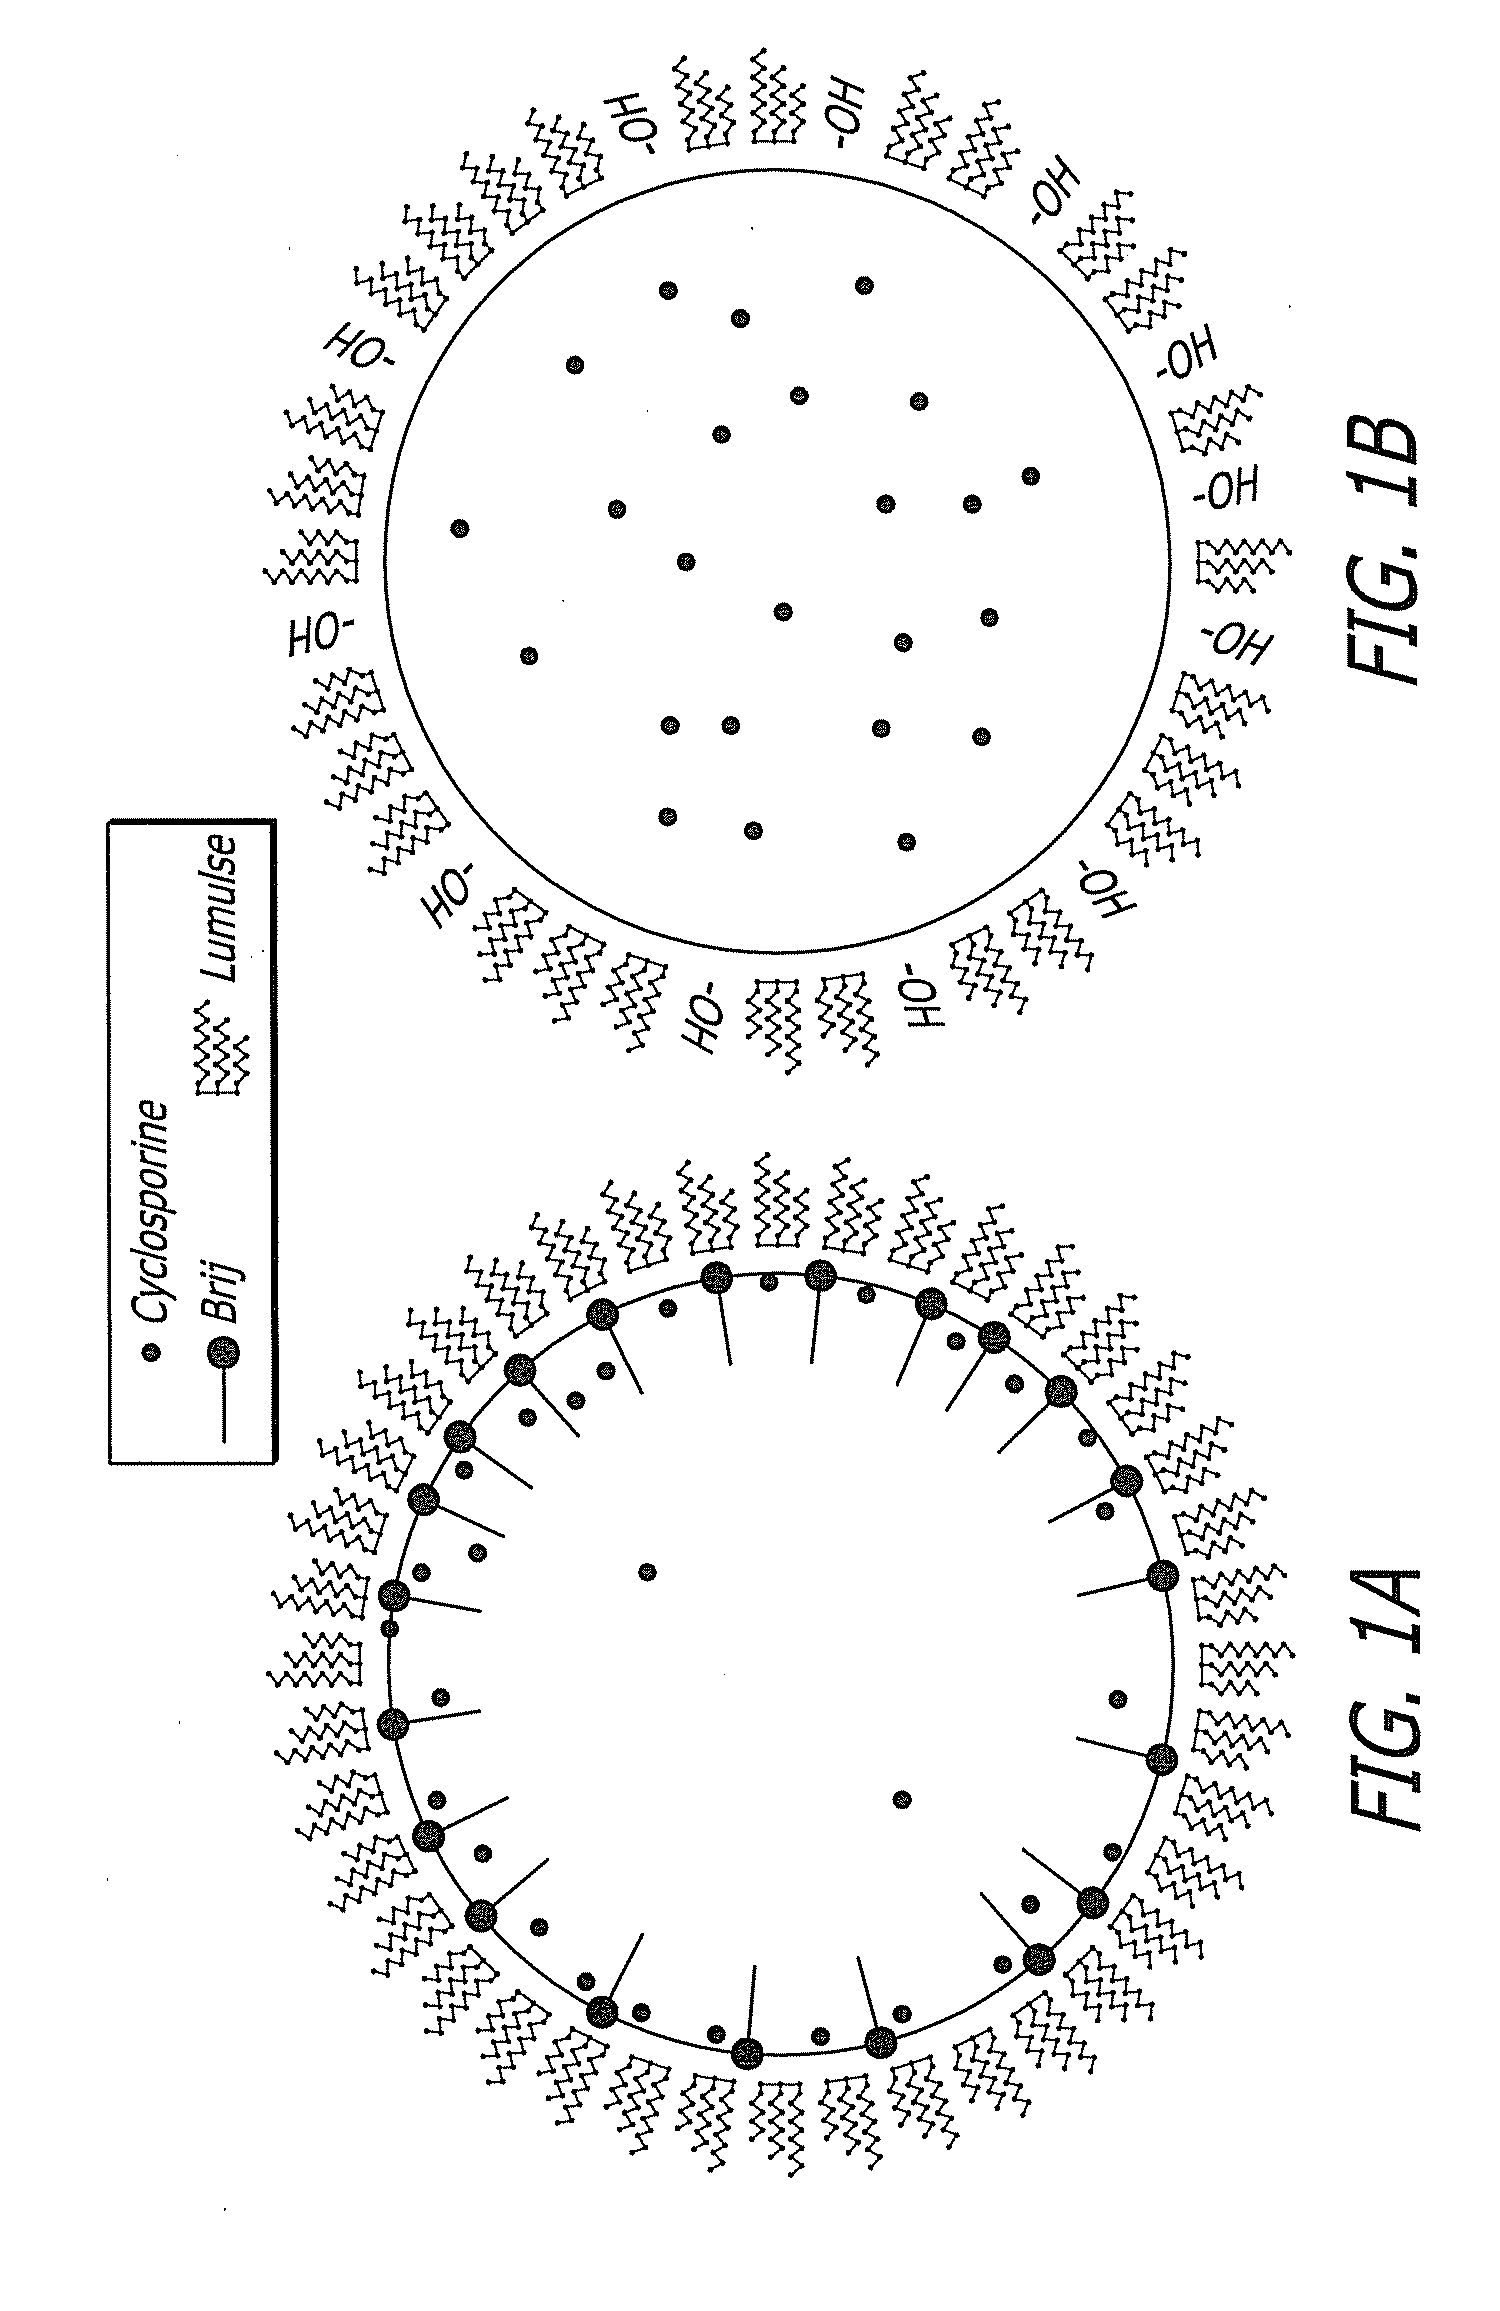 Omega-3 oil containing ophthalmic emulsions